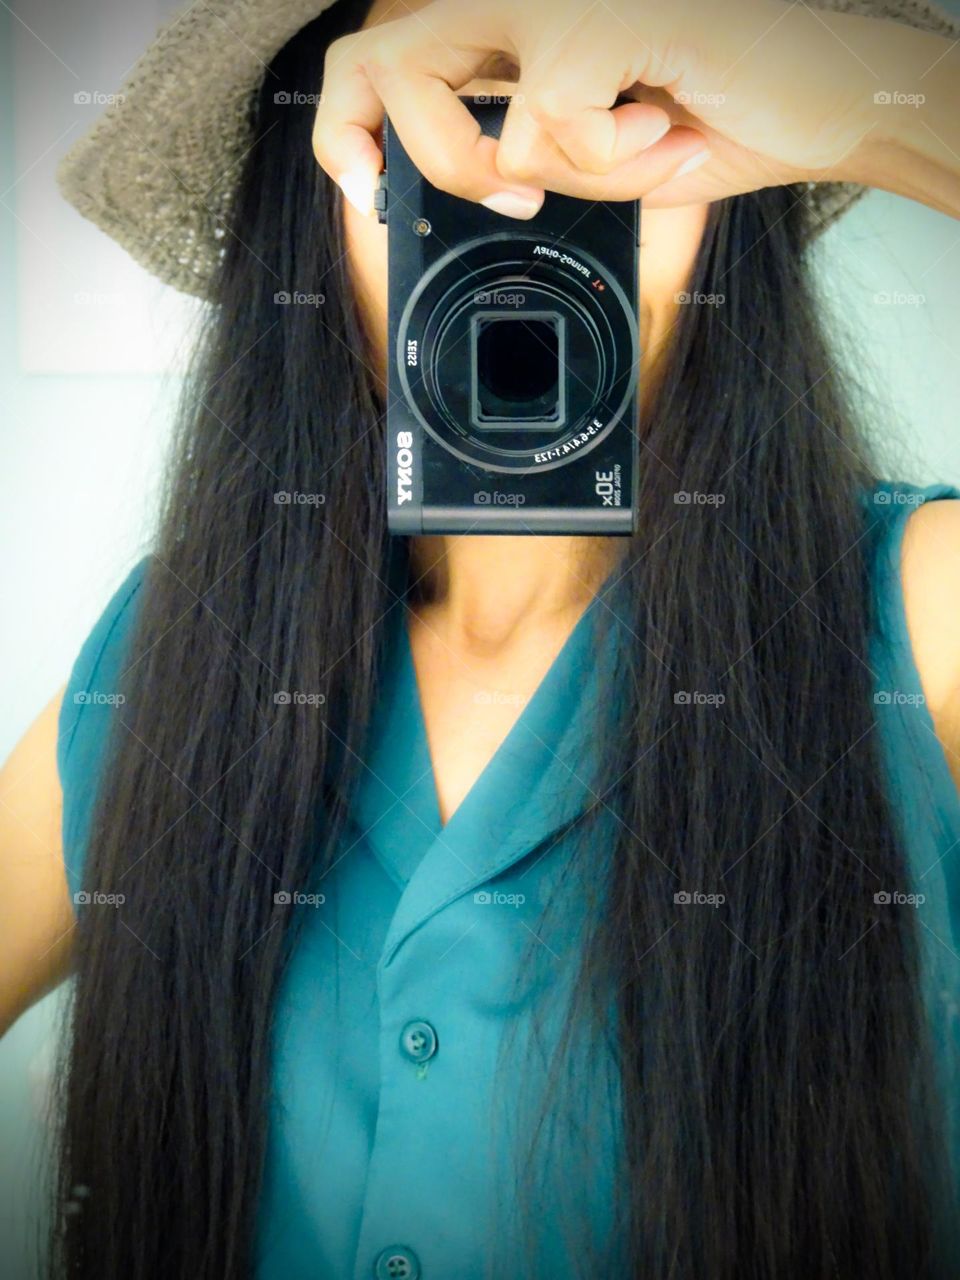 A woman with a black long hair holding a point and shoot camera.